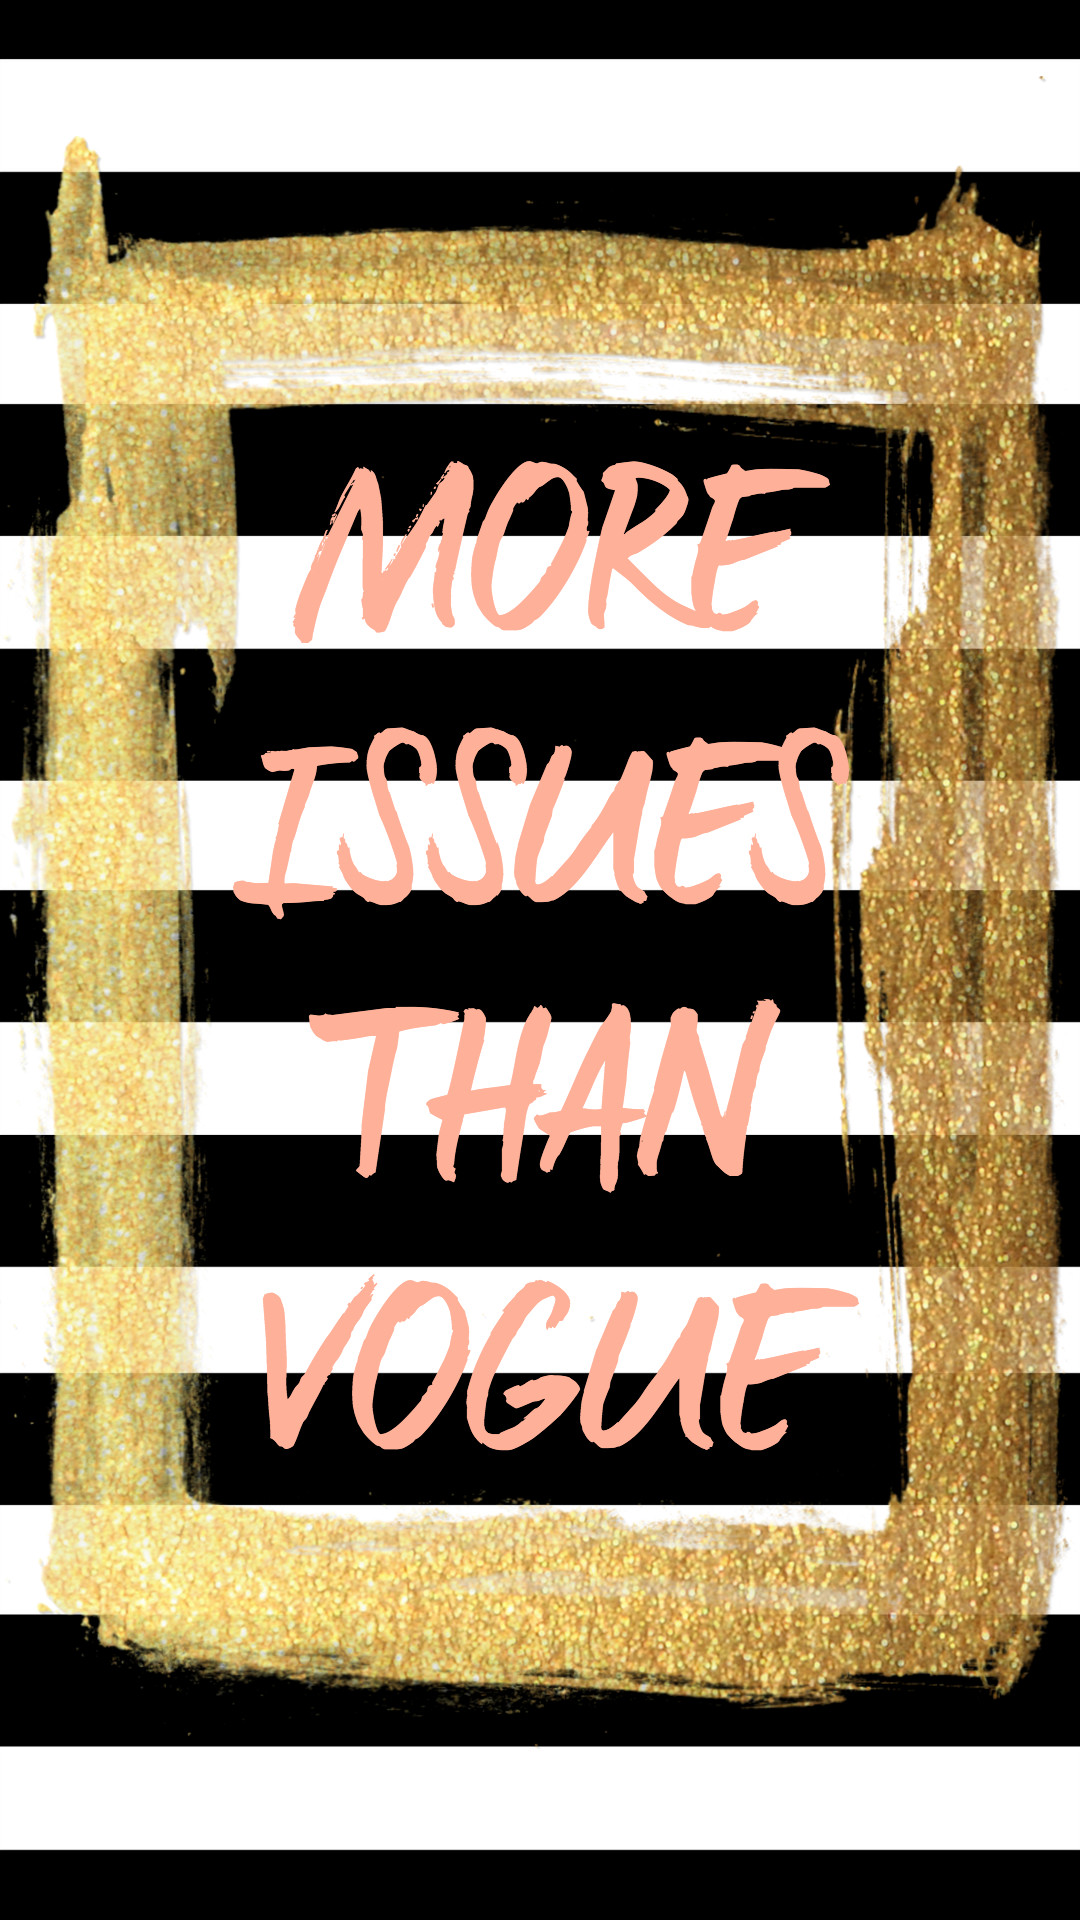 1080x1920 MORE ISSUES THAN VOGUE tjn